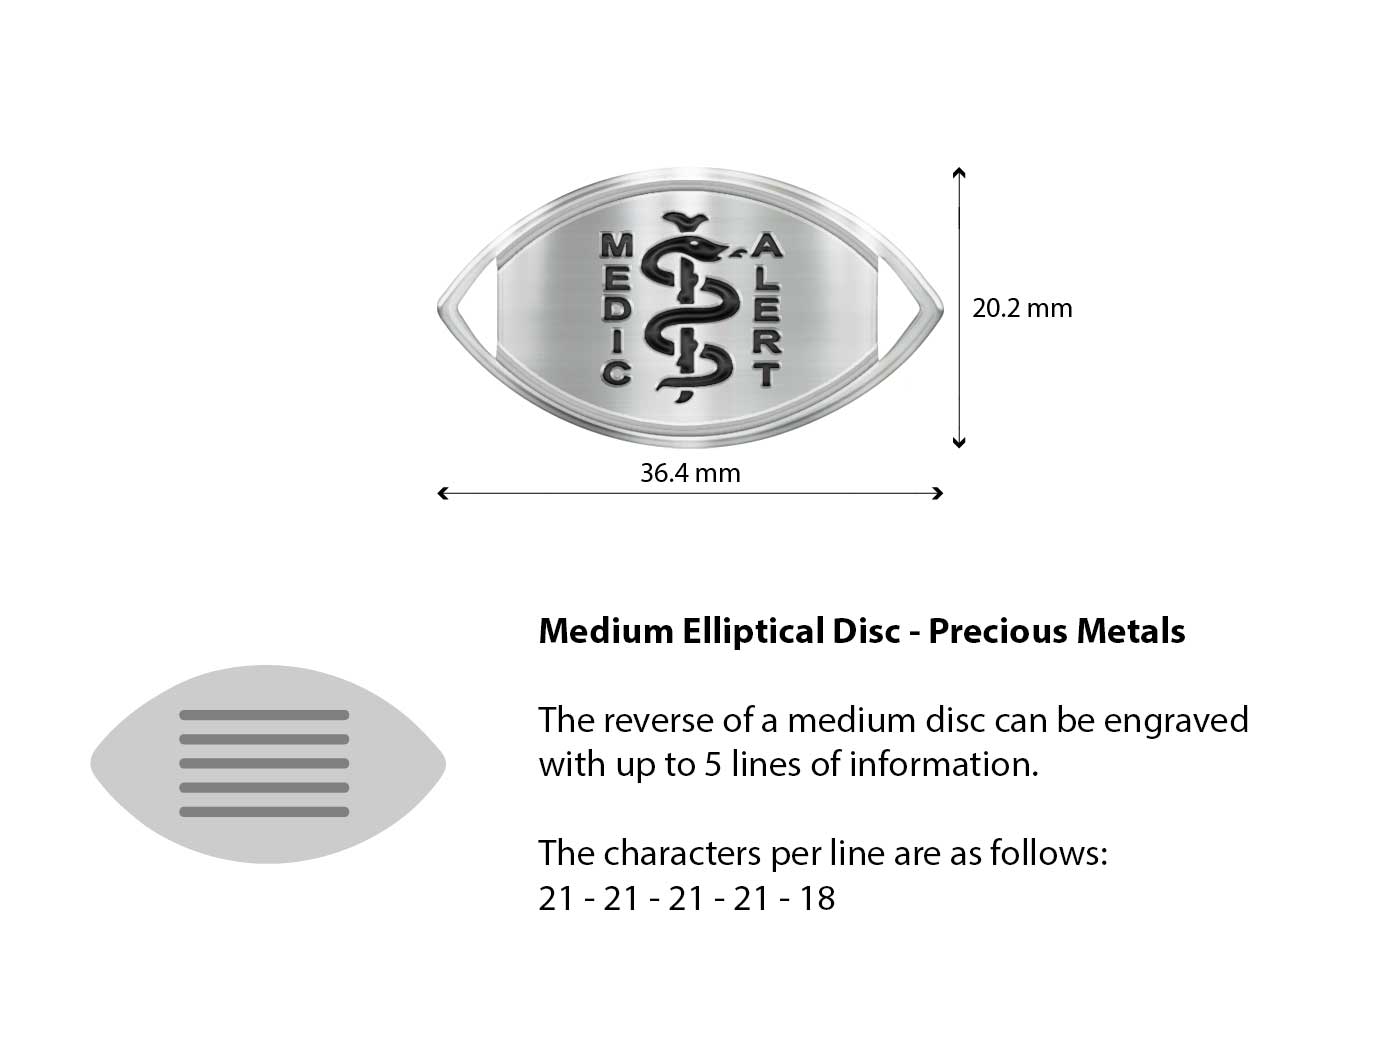 Diagram of the MedicAlert precious metal medium elliptical disc with measurements and descriptions of the engraving specifications